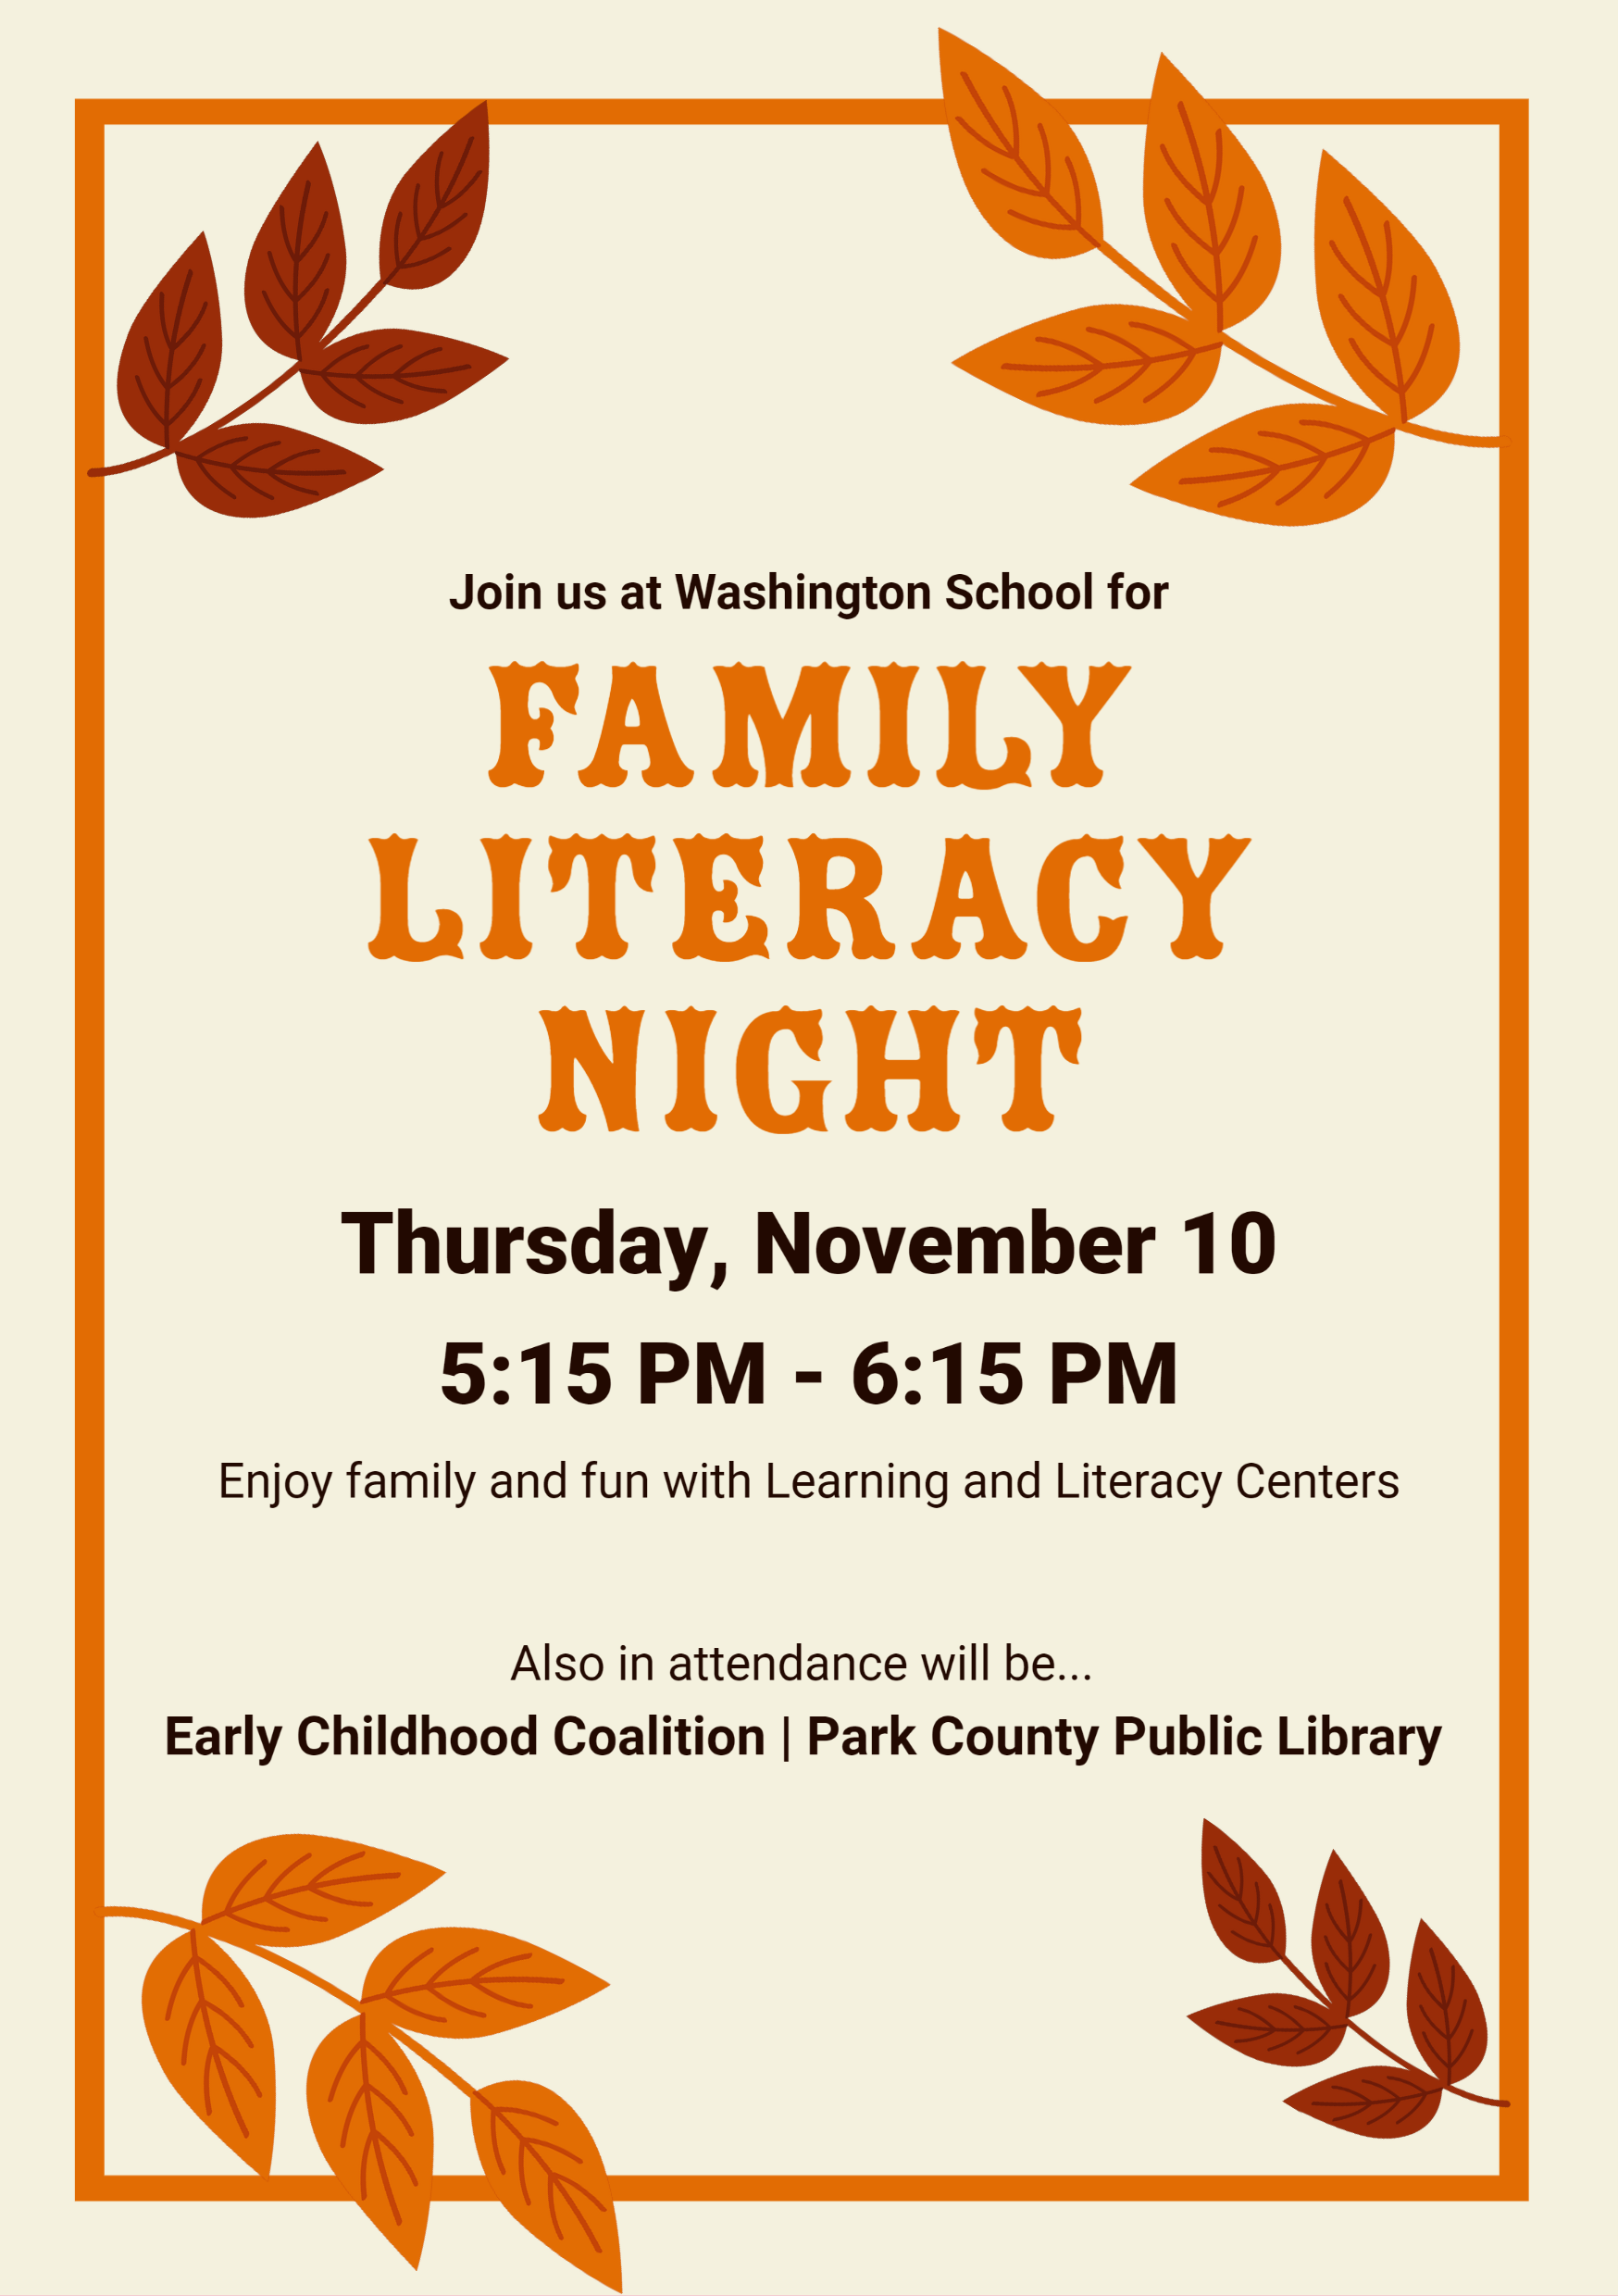 Join us at Washington School for Family Literacy Night Thursday, November 10 5:15 PM - 6:15 PM Enjoy family and fun with Learning and Literacy Centers